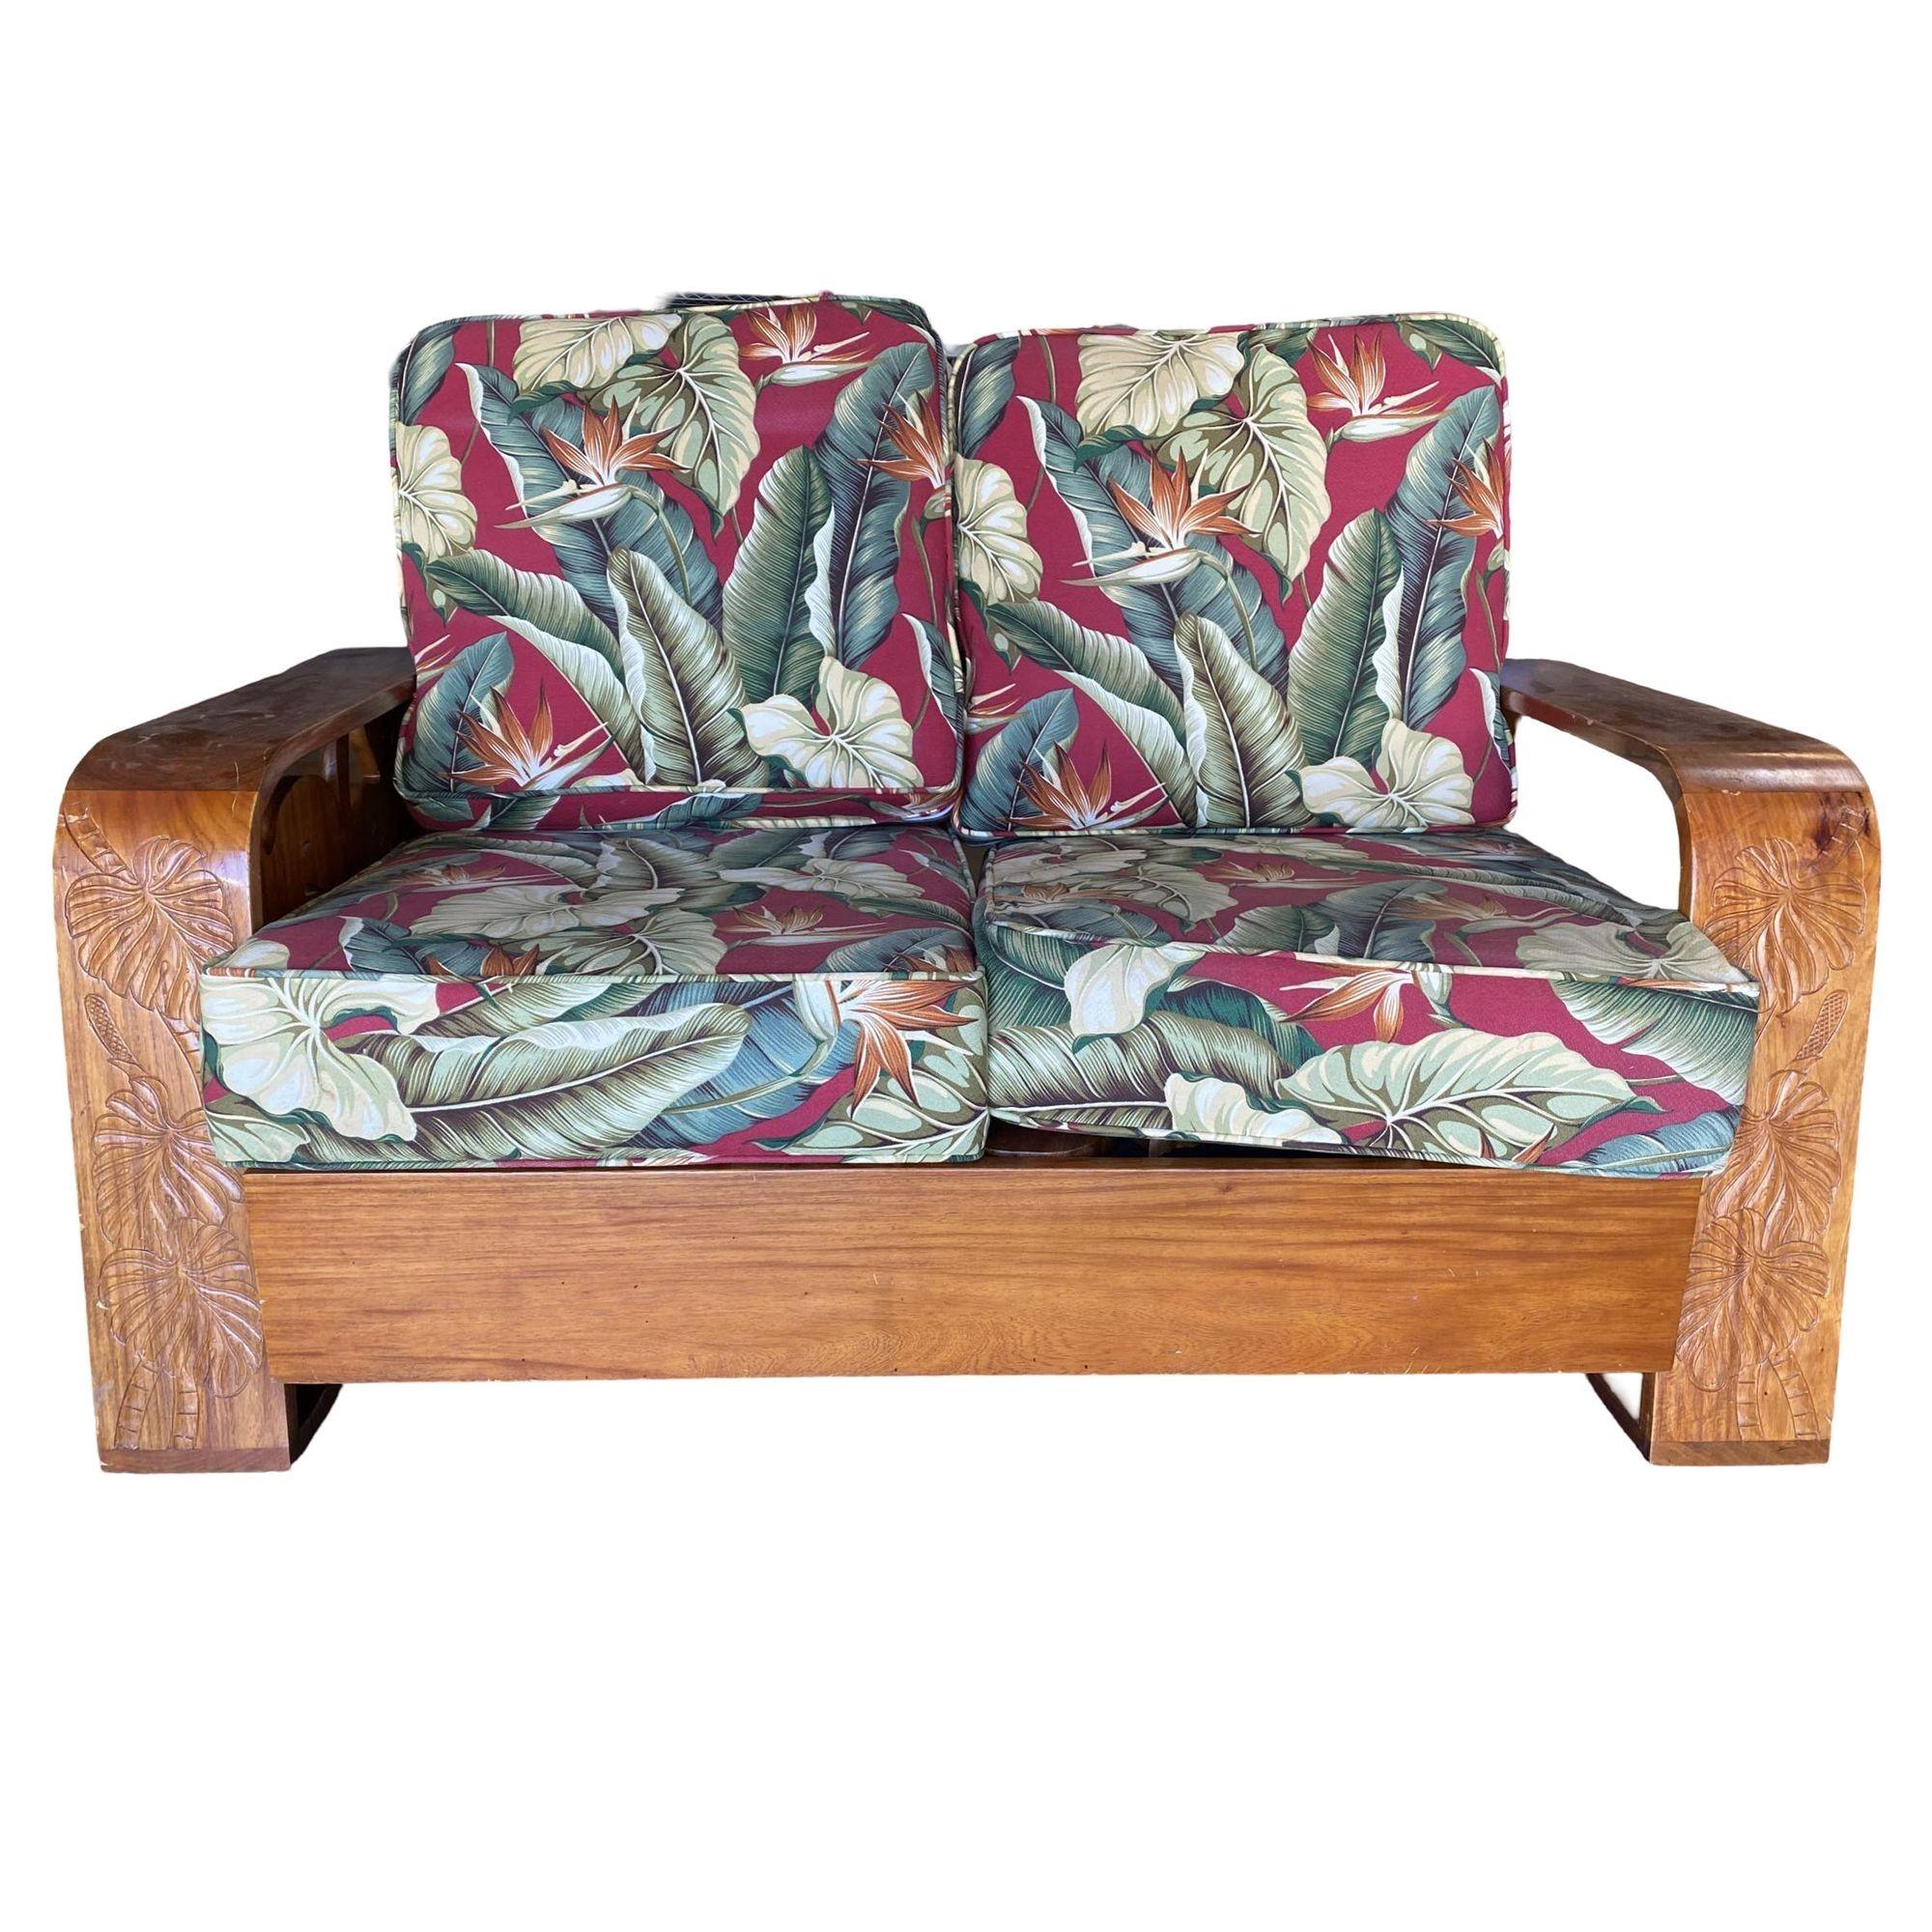 Late 1940's carved koa wood tropical loveseat featuring large wood panels carved into palm leaves fixed to streamline speed arms. This is a great transitional piece featuring mid-century styling with distinct Art Deco Influence and an early example